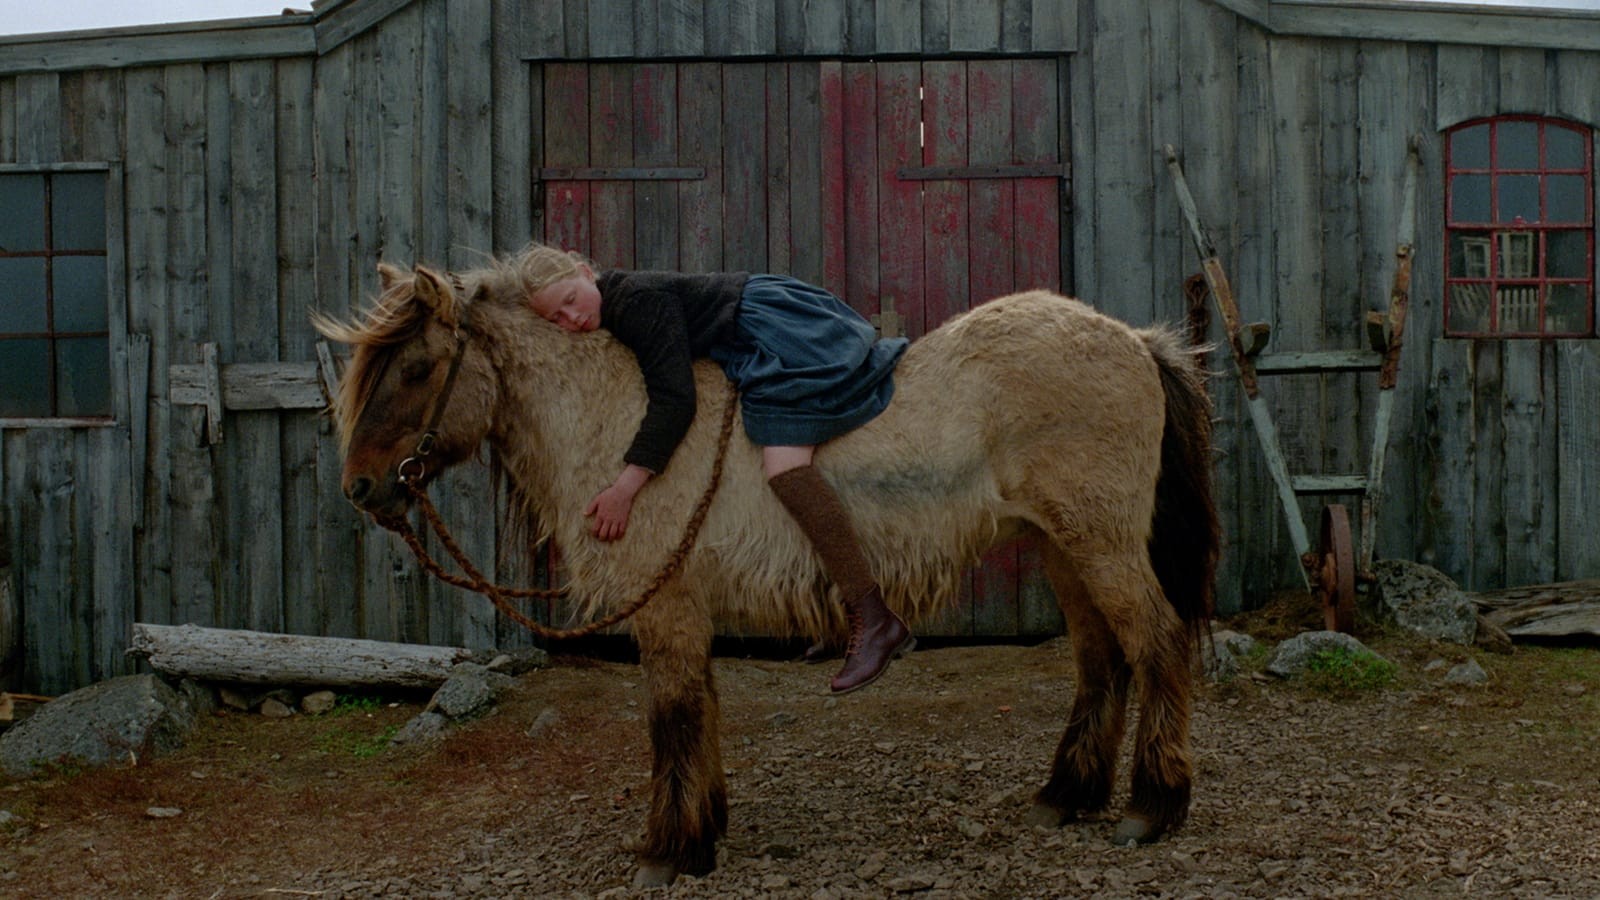 A young blonde girl lays upon a horse in front of a barn.